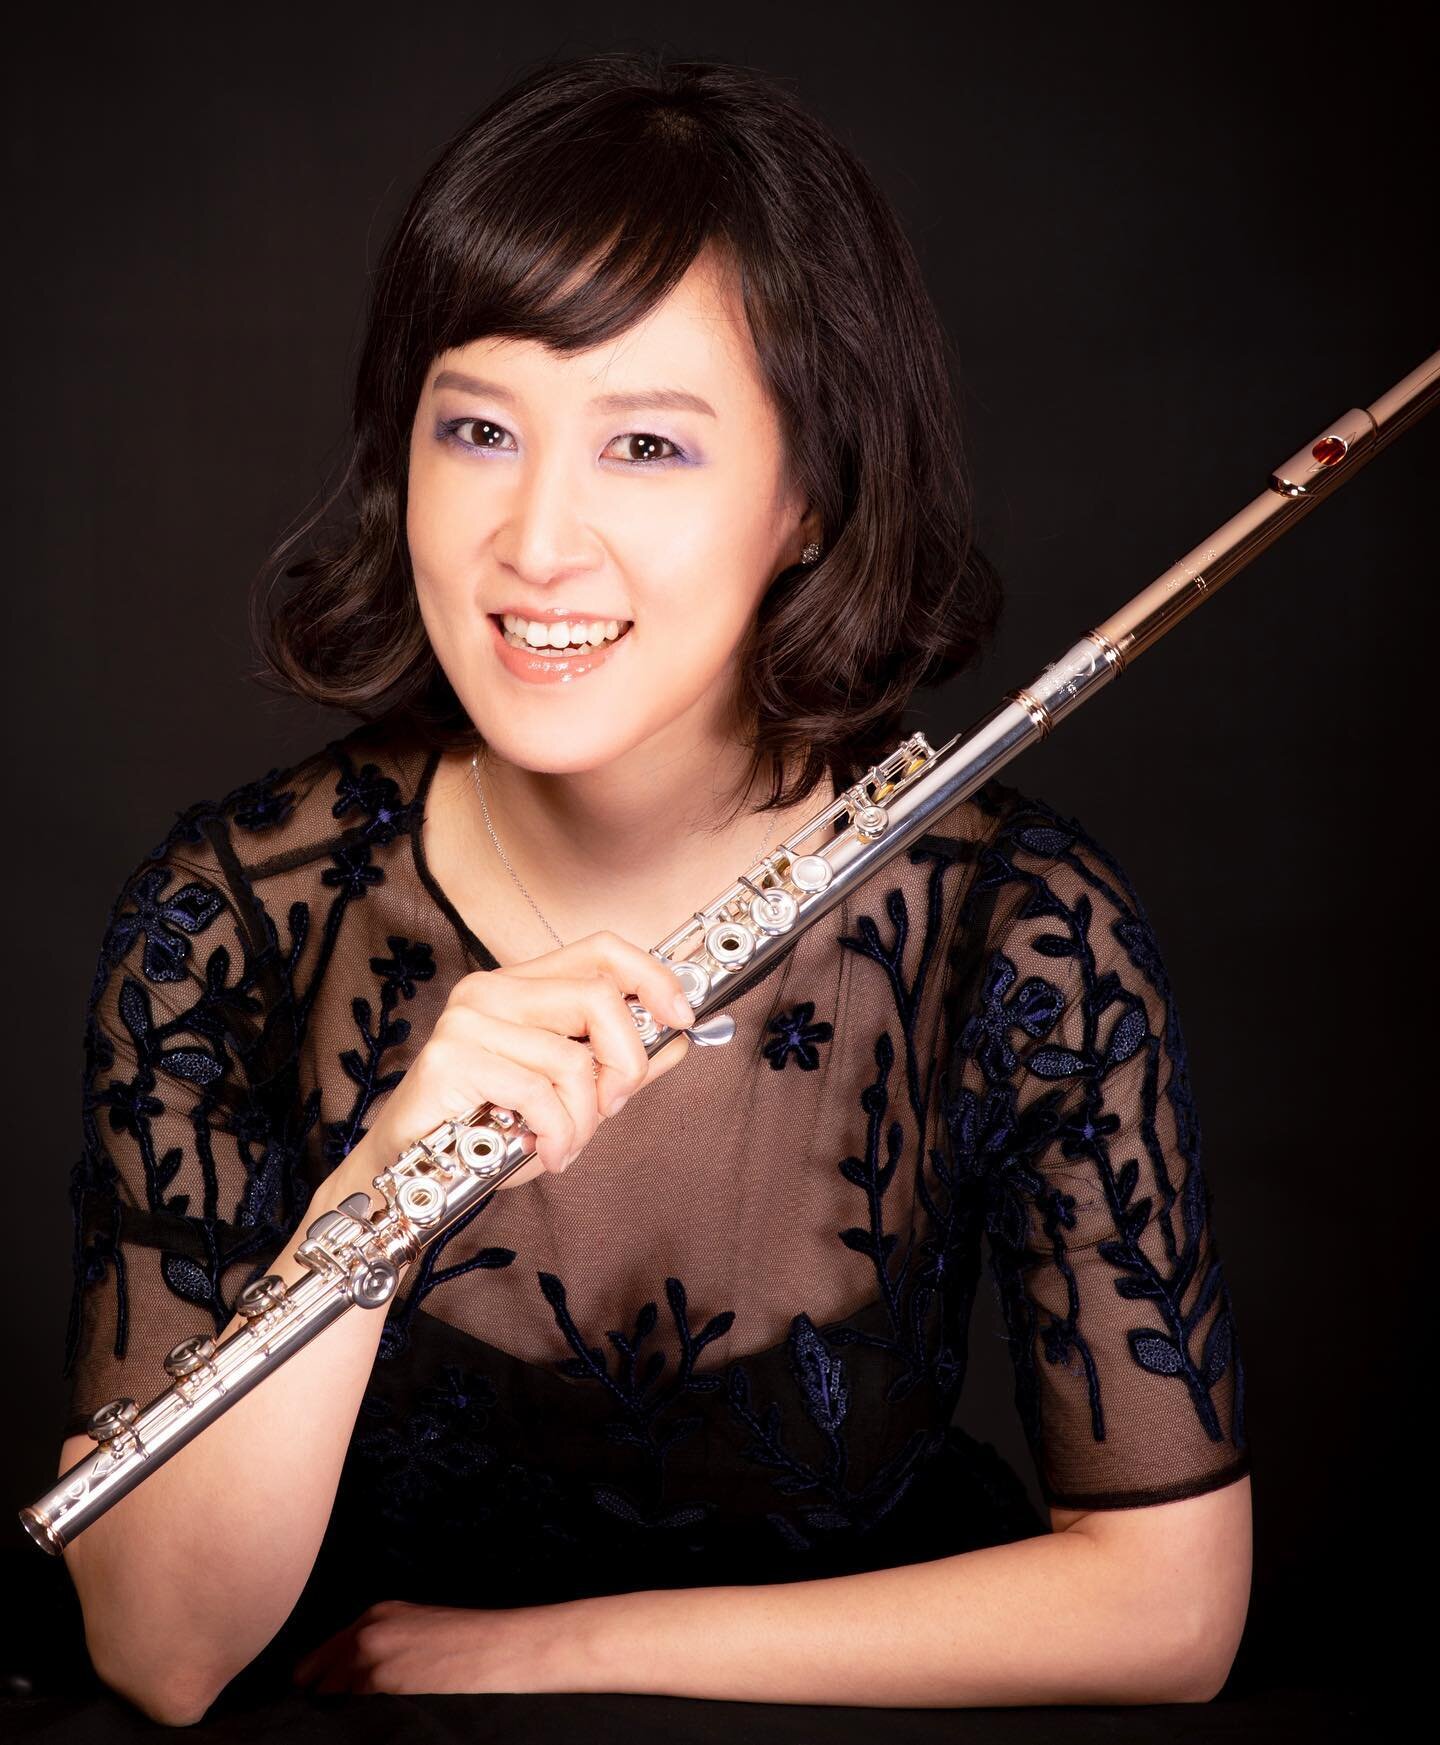 -
Meet the Musician of the Lenox Hill: Soo-Kyung Park

Flutist Soo-Kyung Park enjoys a multi-faceted career as an international soloist, chamber musician, artistic director, producer, and teacher. She was accepted to The Juilliard School, Pre-College